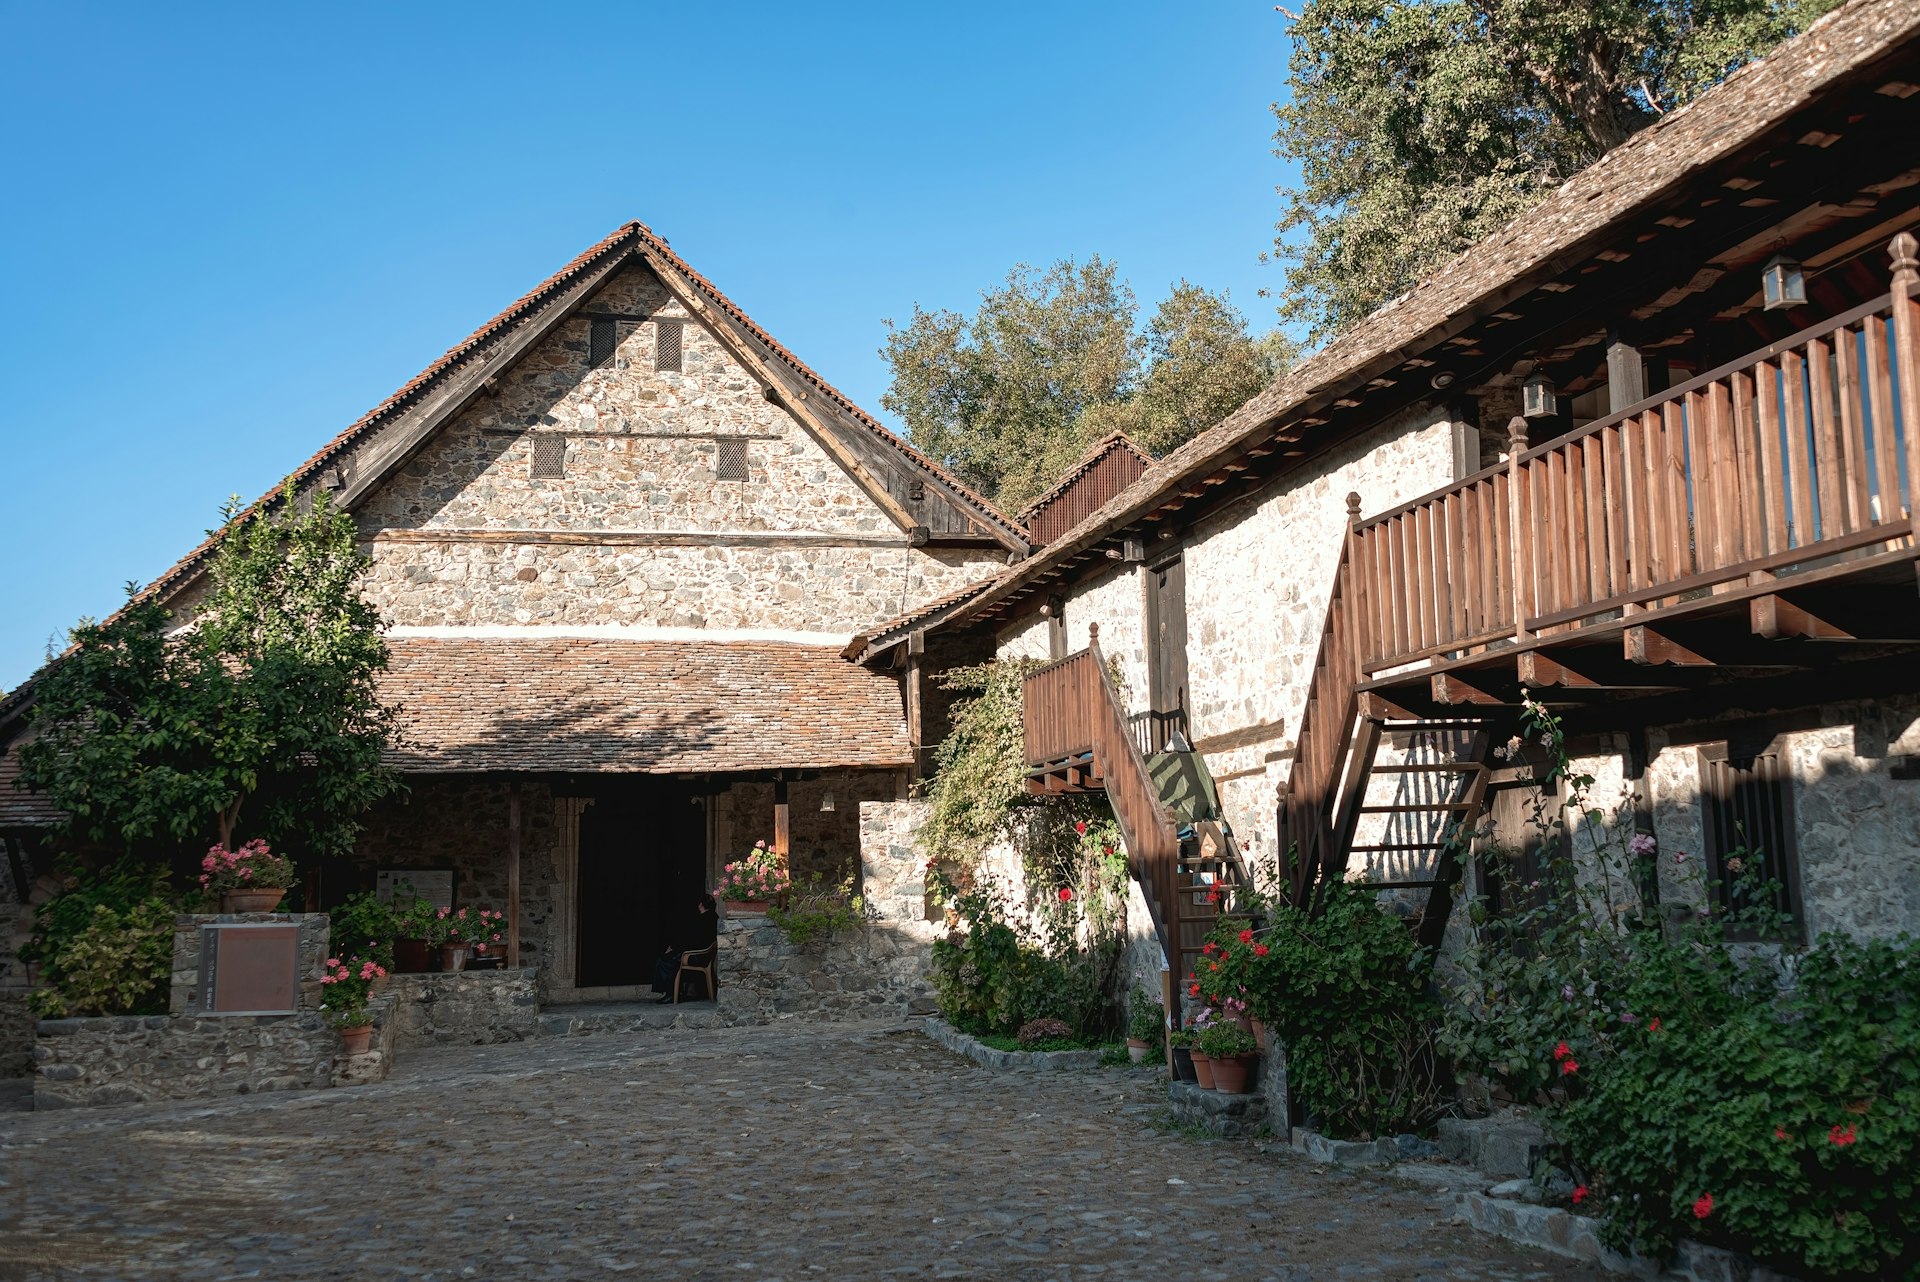 A rustic stone building with a wooden roof in Cyprus. 